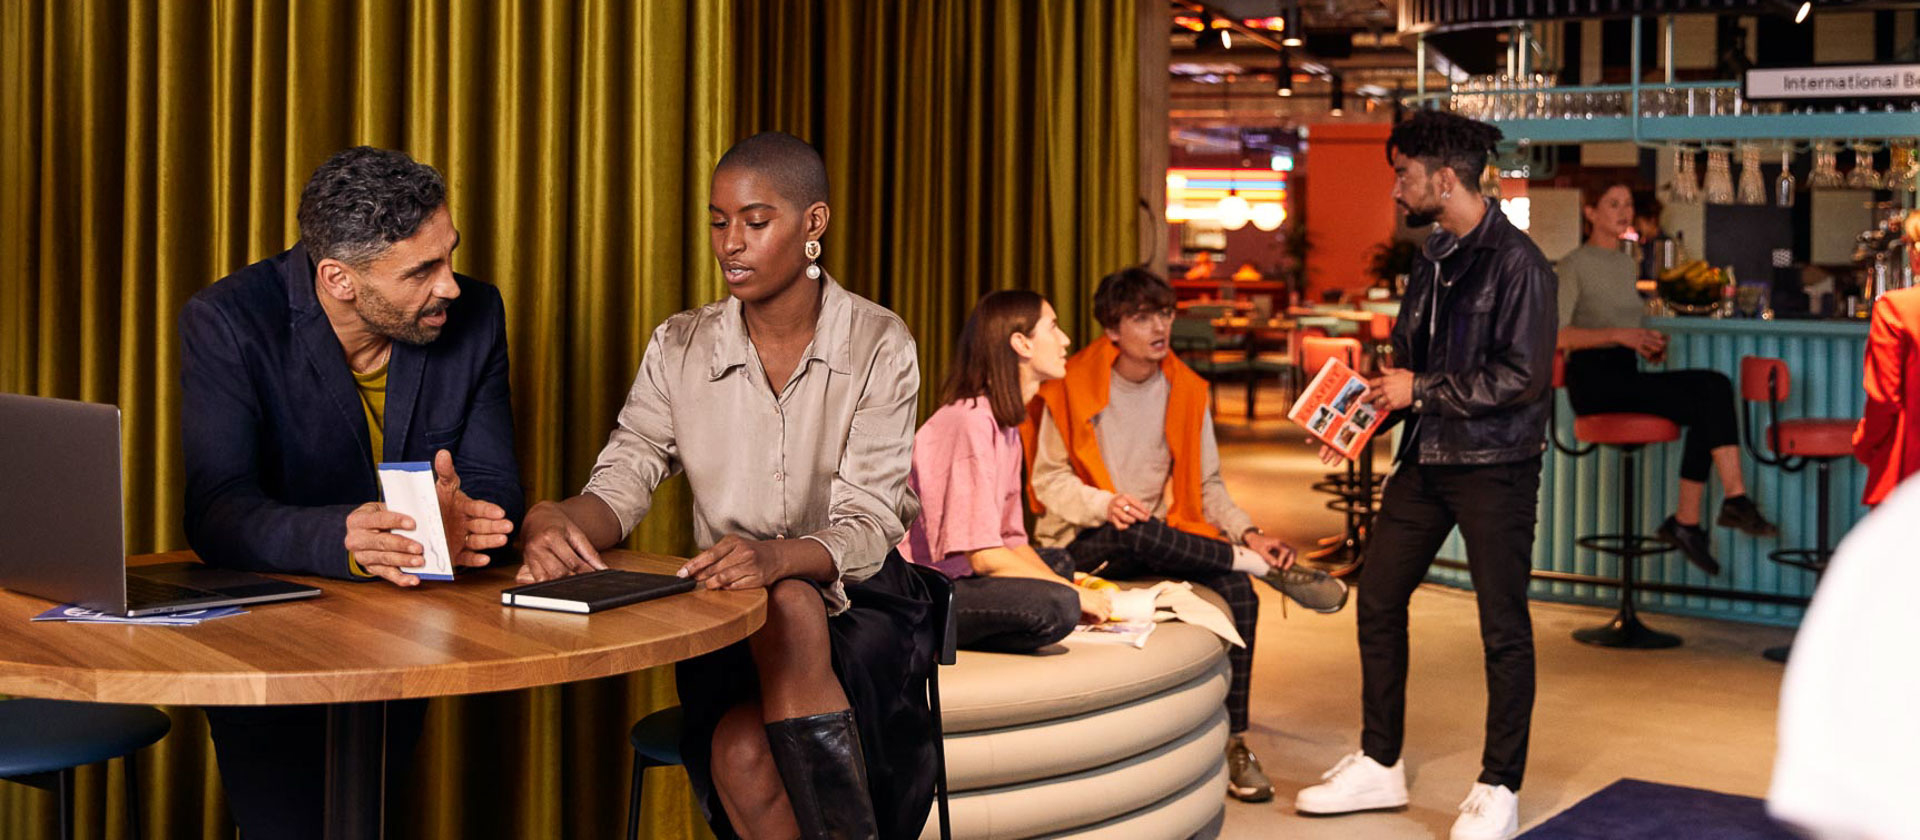 Group sits on bar table near an event and restaurant space at The Student Hotel Bologna